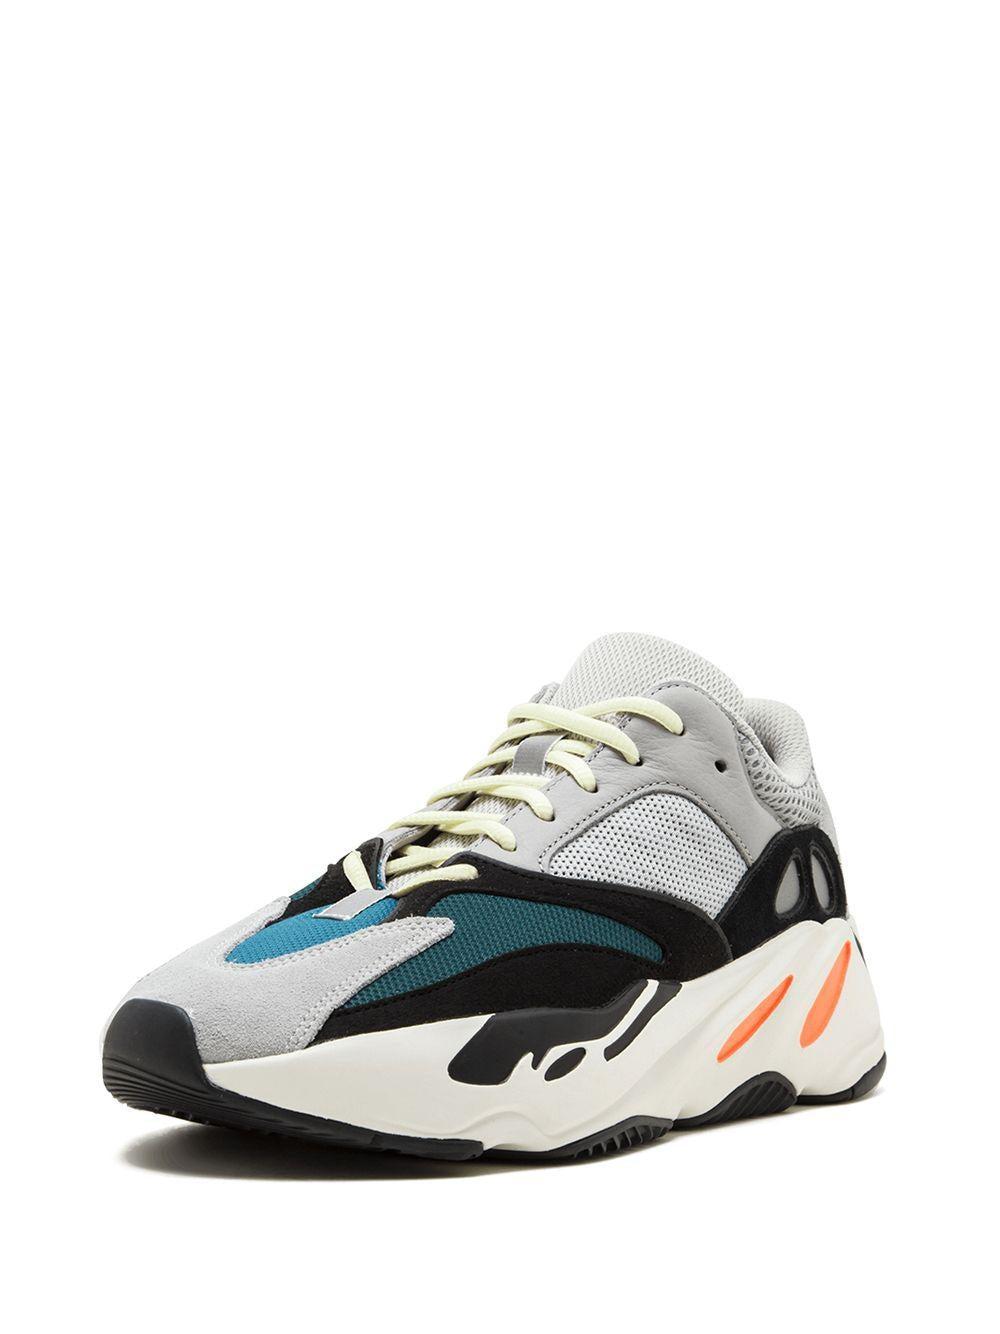 Yeezy Synthetic Yeezy Boost 700 "wave Runner" Sneakers for Men - Save 70% |  Lyst